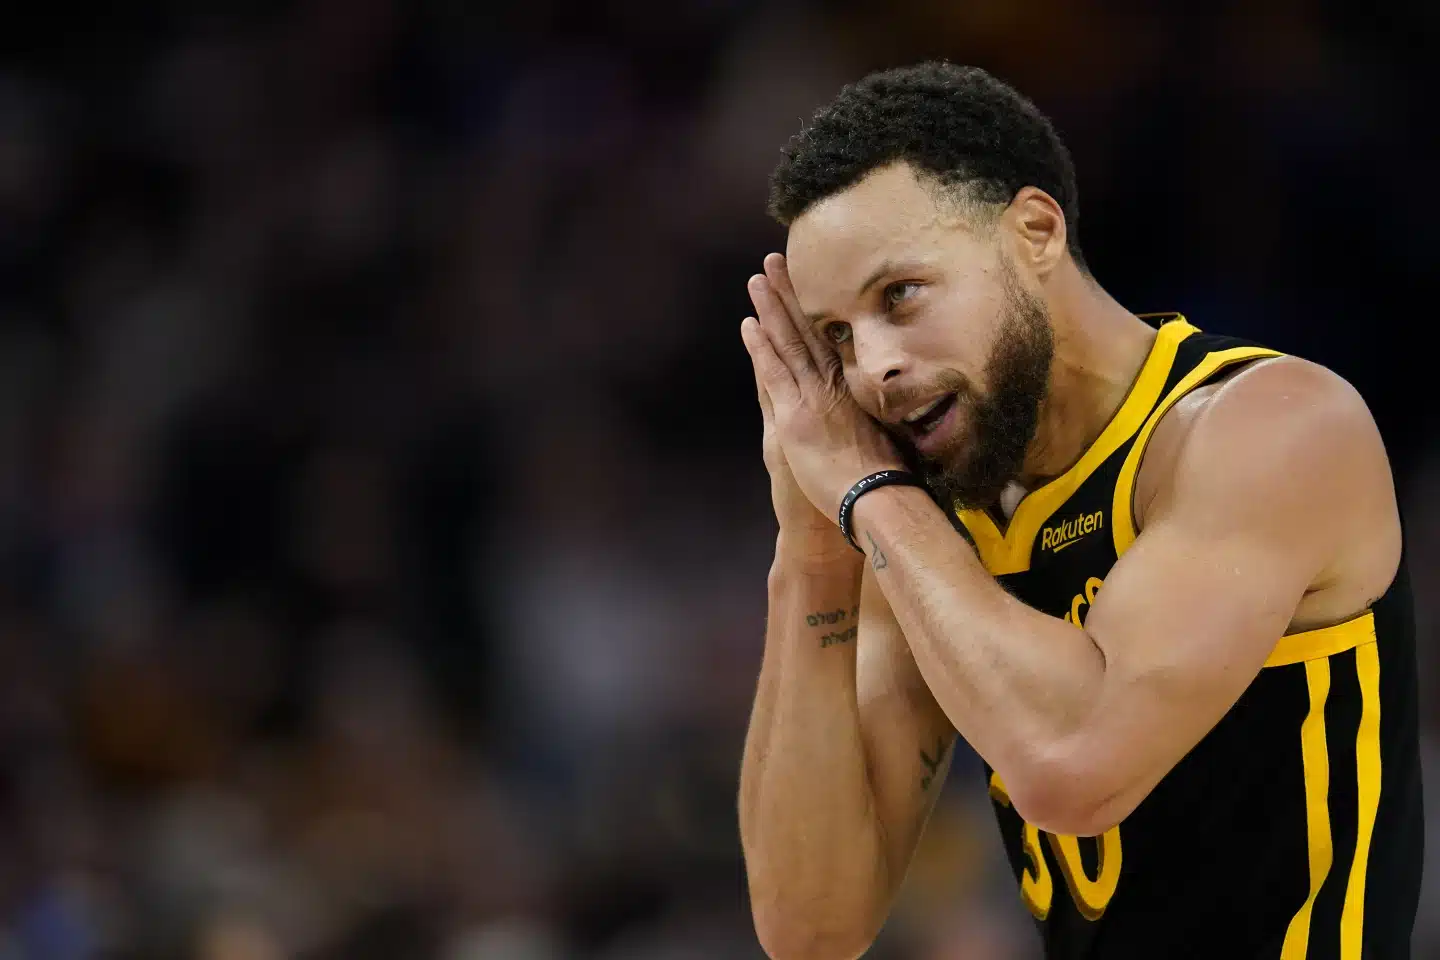 Stephen Curry To Only Stay With Warriors If They Aren't "Bottom Feeders"